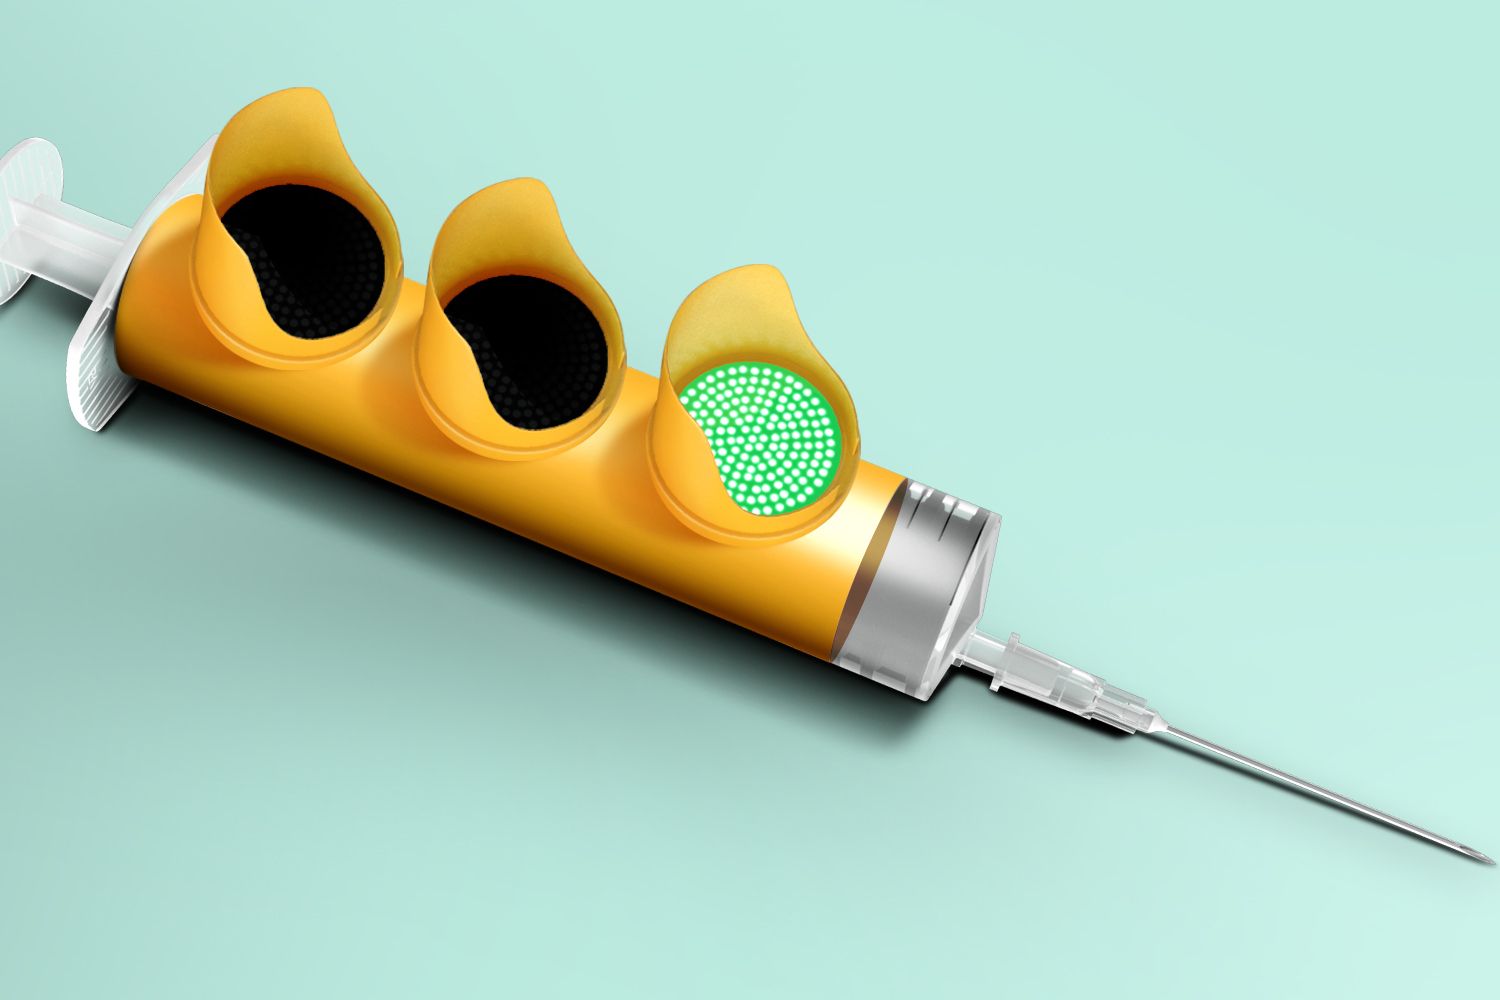 Covid vaccine, but the syringe is a traffic light with green light.